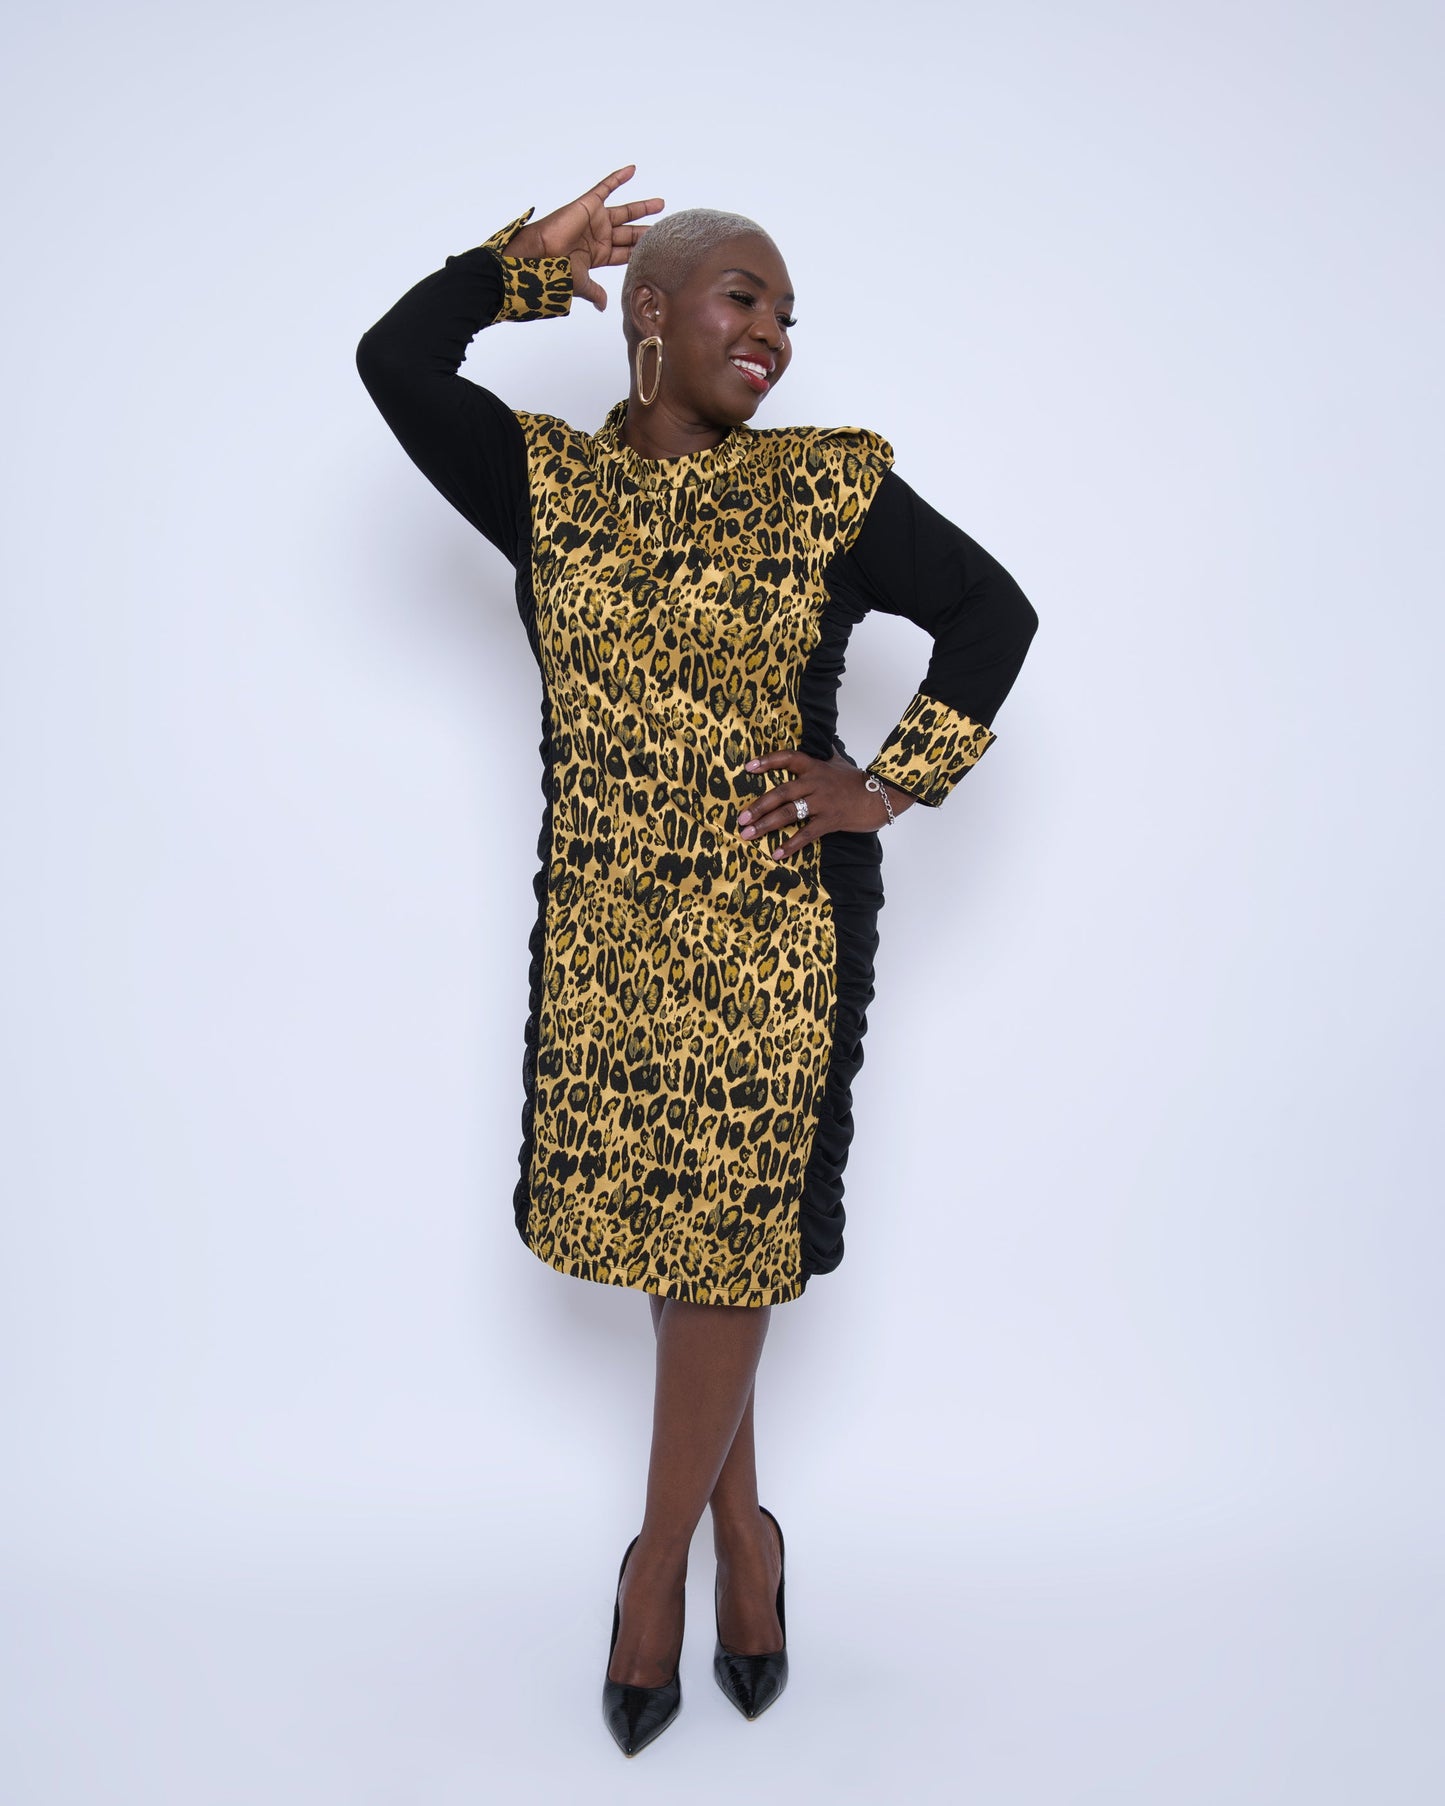 Women's Plus Size Black Gold Bodycon Midi Leopard Brocade Jacquard Dress styled with gold earrings and black heels for an elegant, polished look.